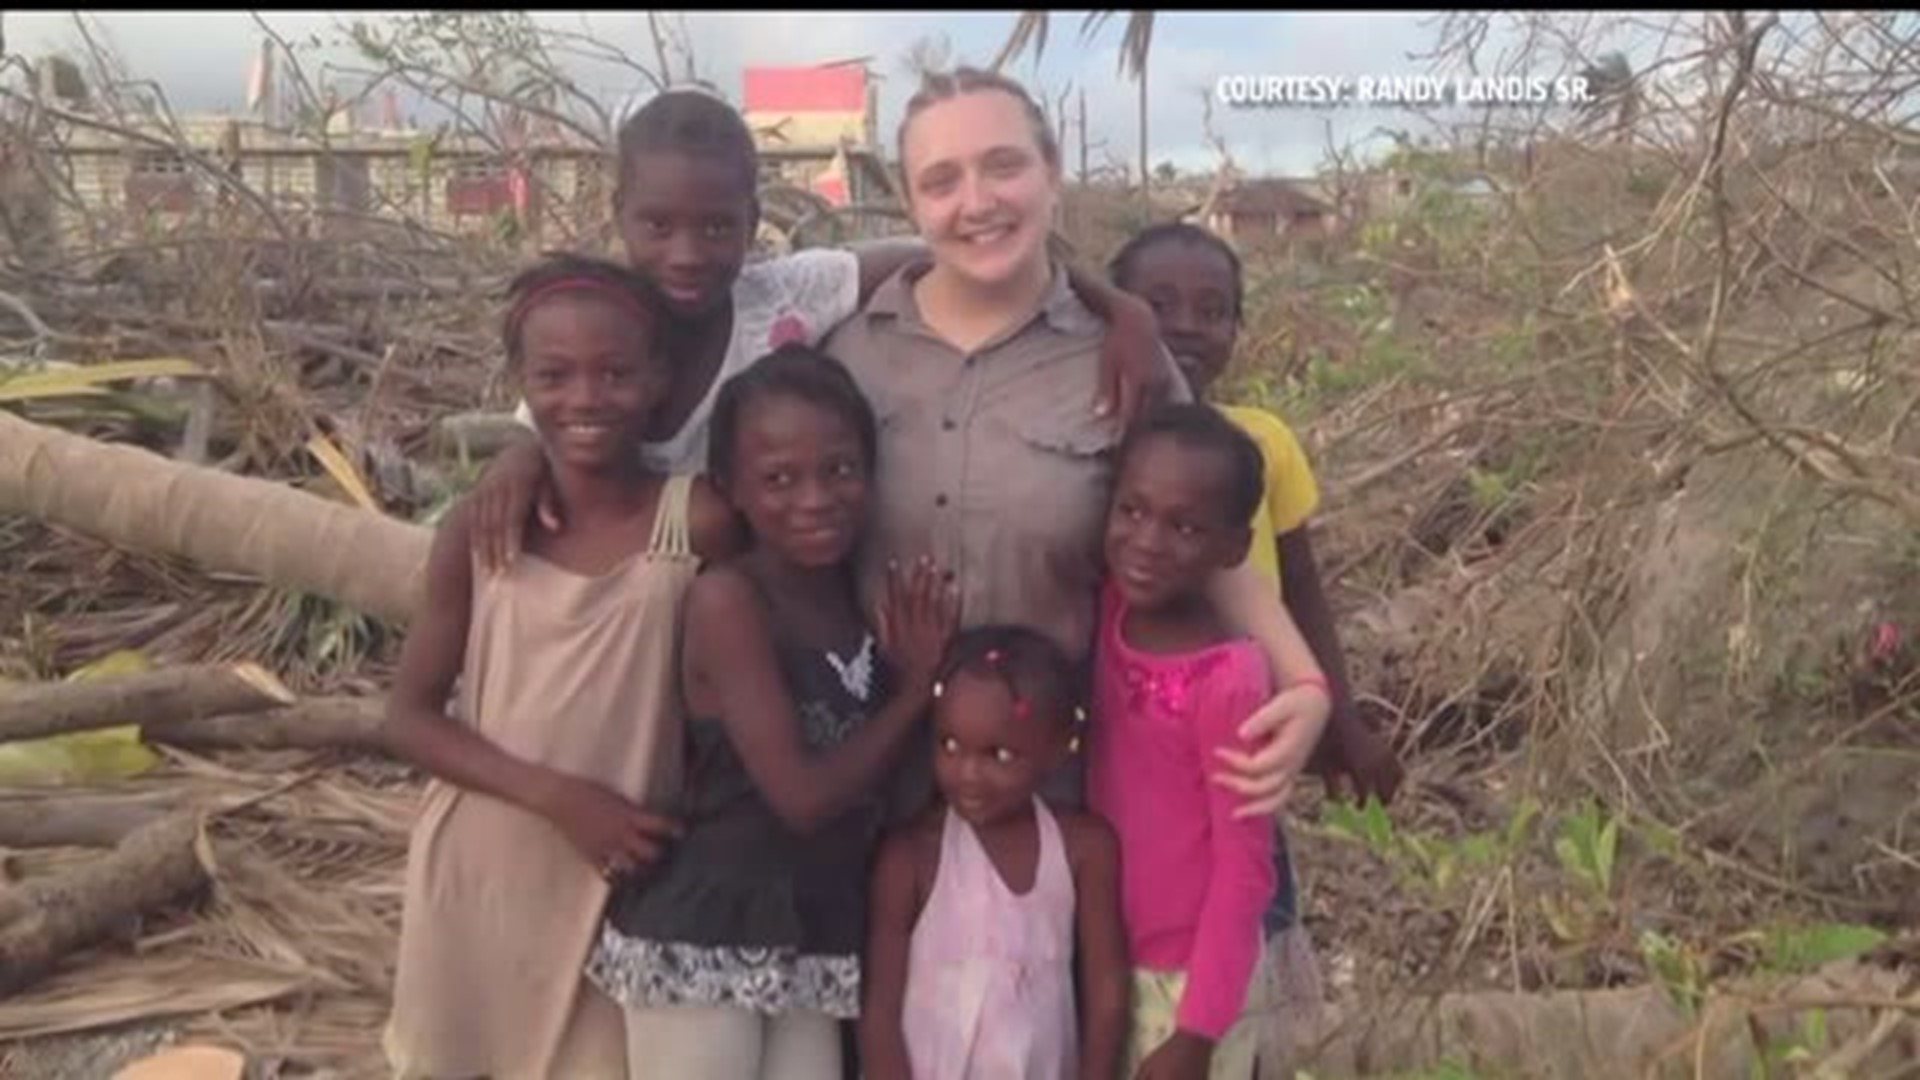 Haiti relief group returns to Lancaster County